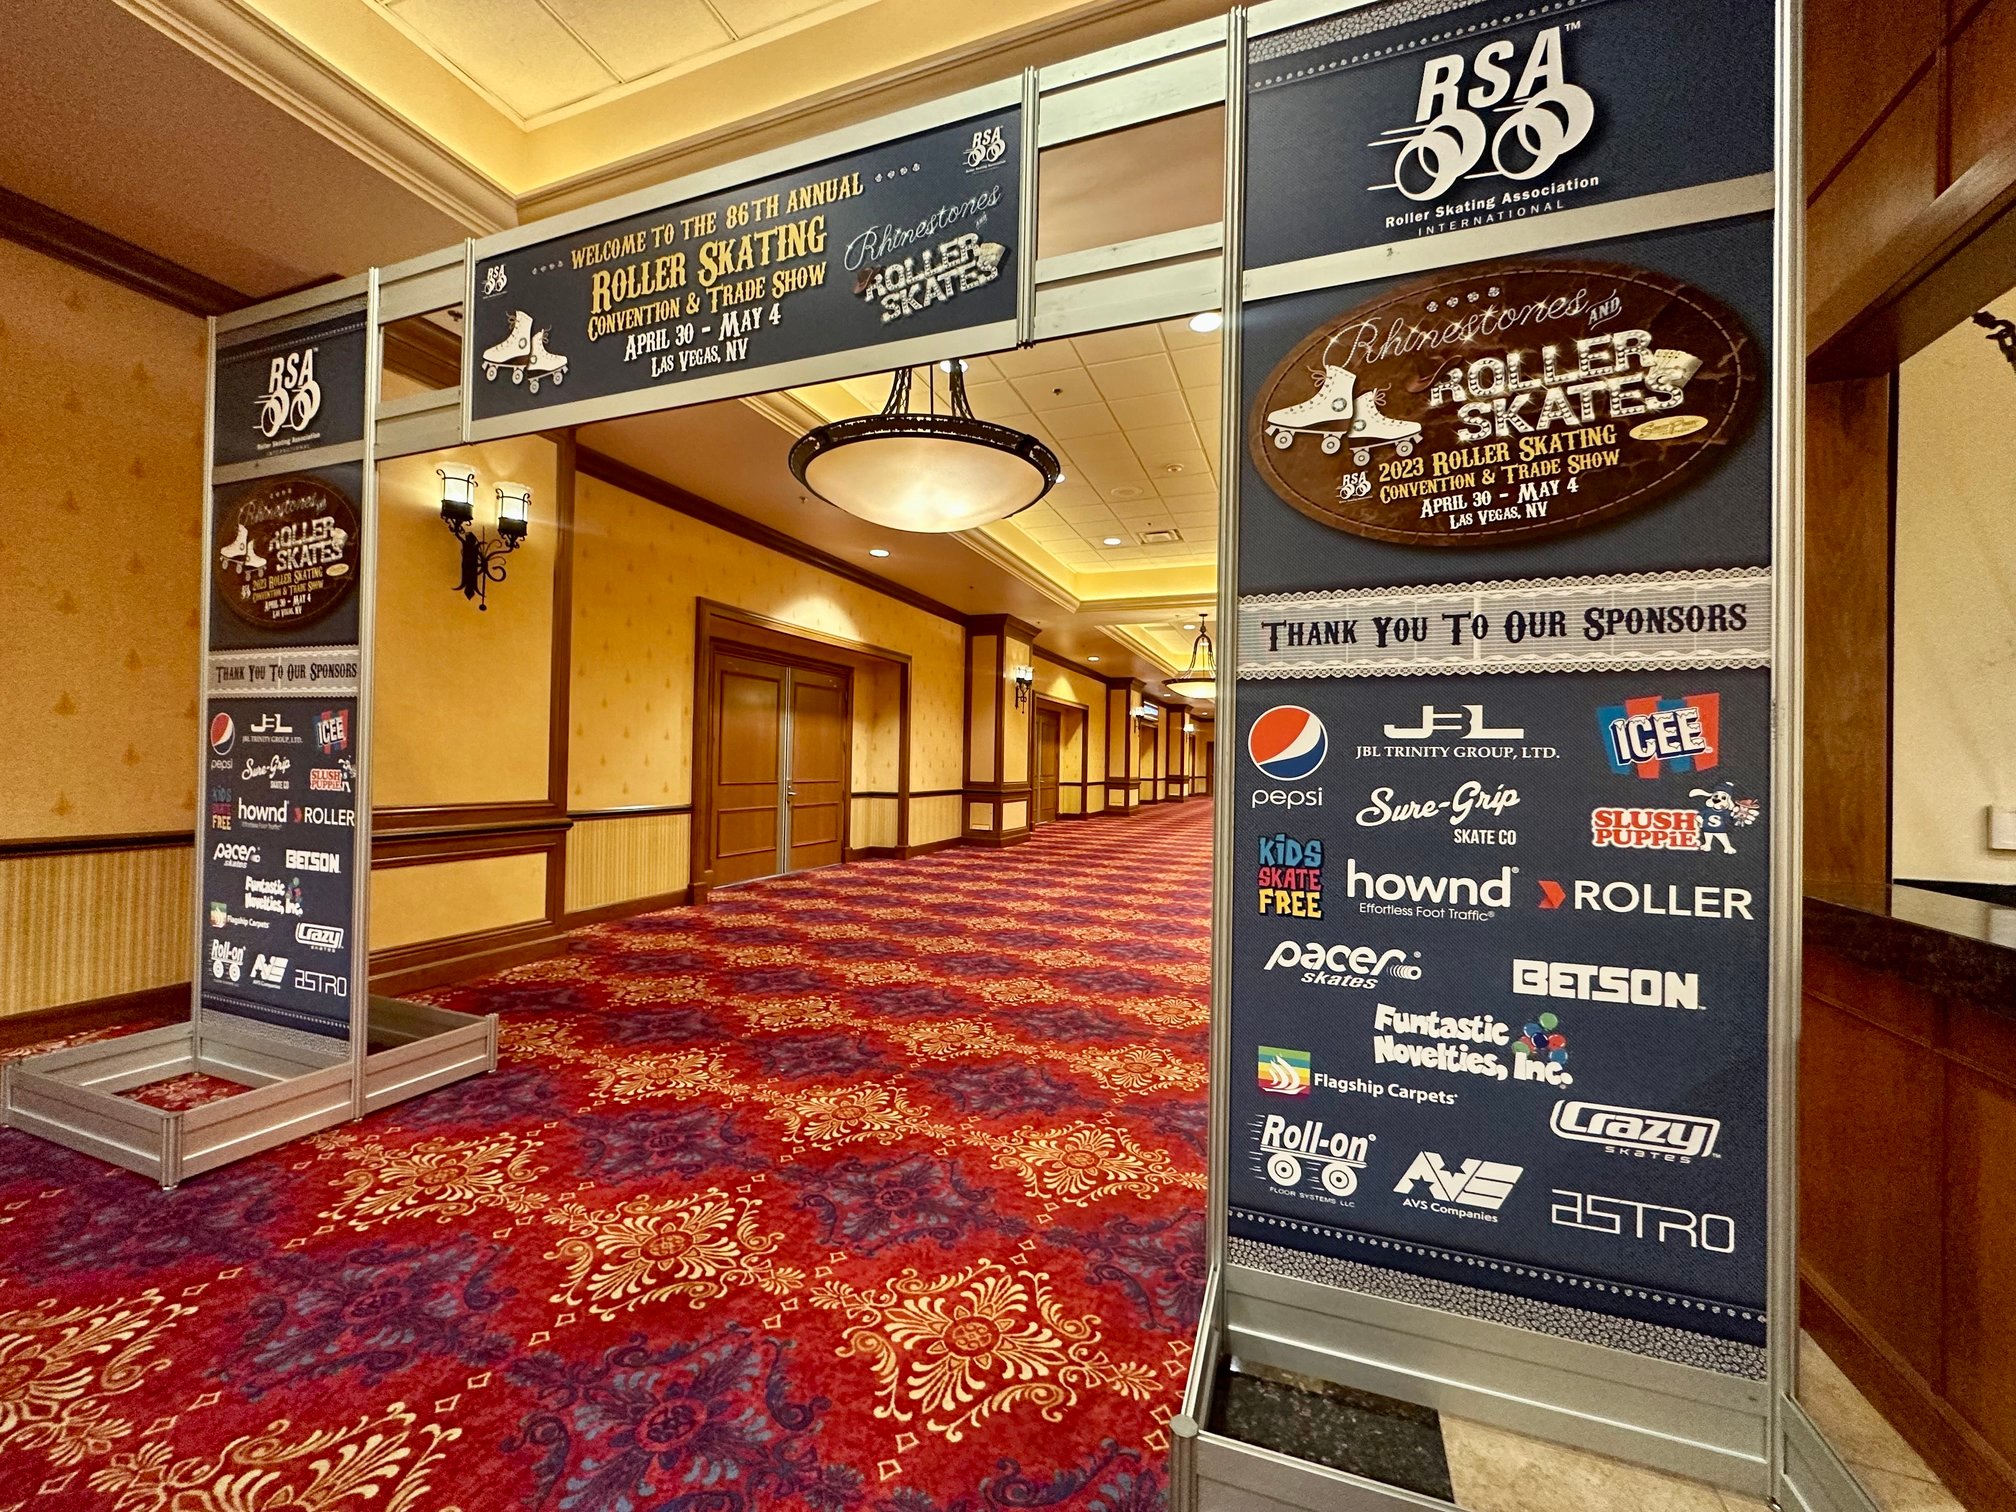 RSA Convention & Tradeshow Highlights Top 3 Takeaways